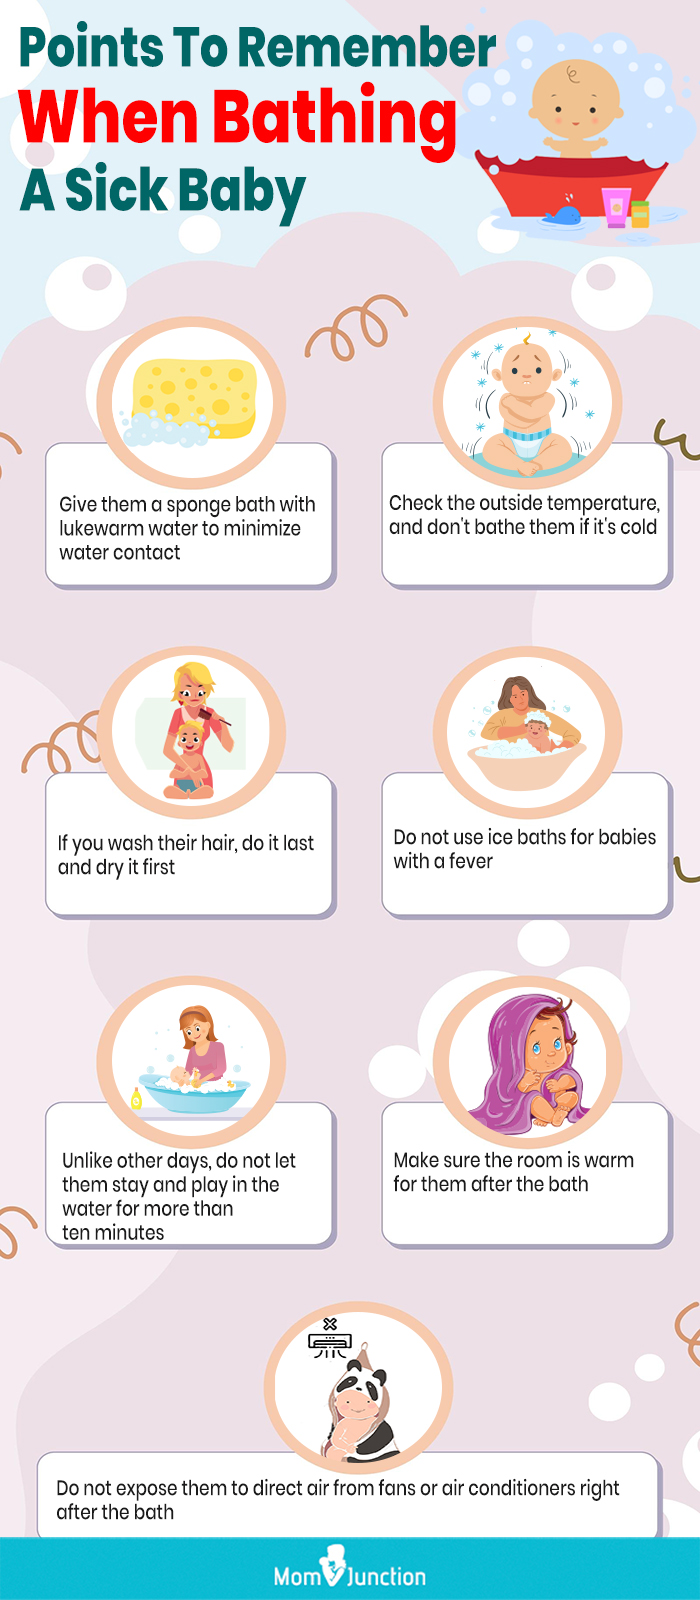 points to rememeber when bathing a sick baby (infographic)